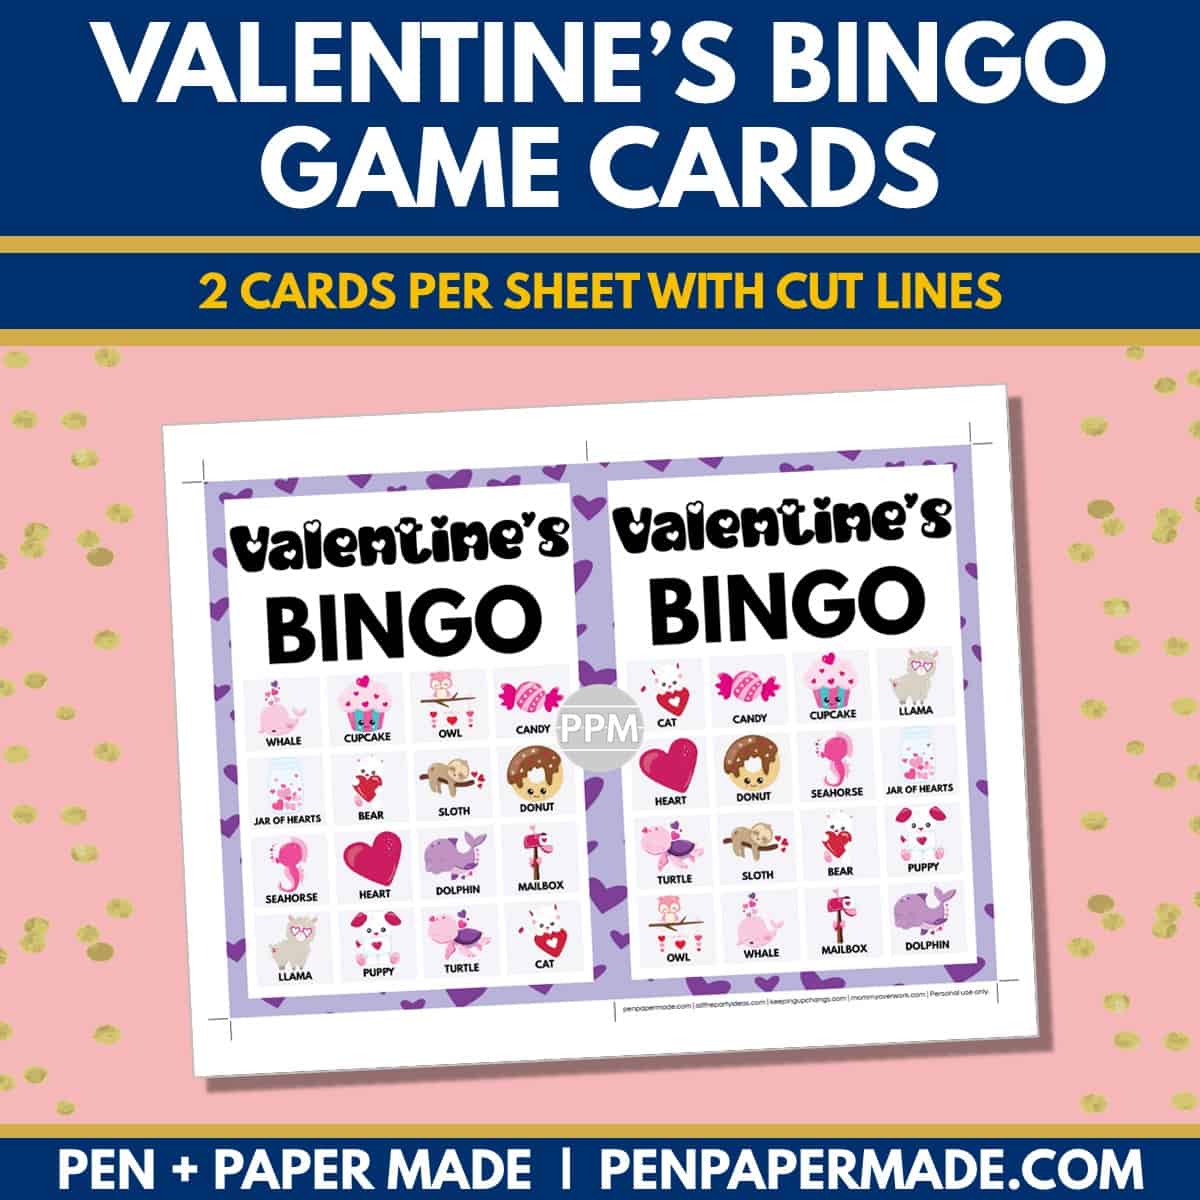 valentine's day bingo card 4x4 5x7 game boards with images and text words.